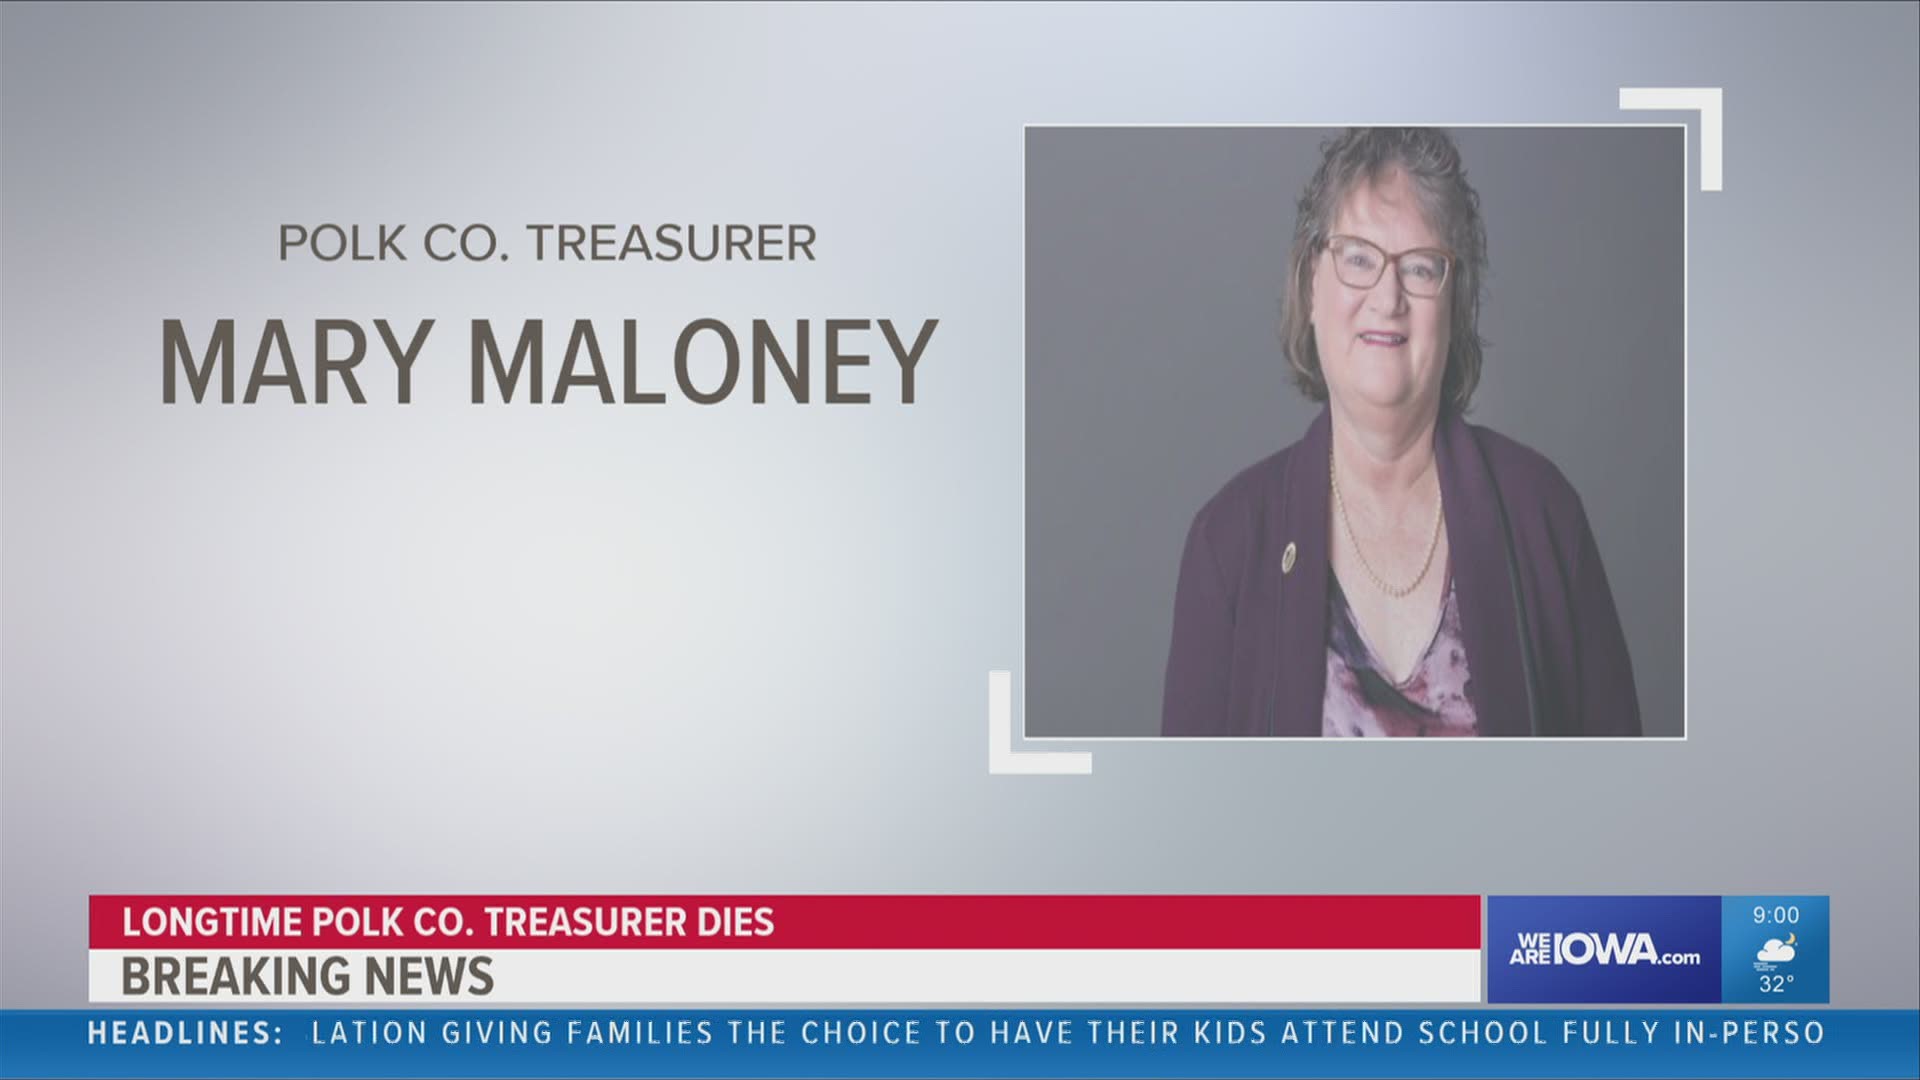 Mary Maloney served seven terms, a total of 32 years, as Polk County's treasurer. She leaves behind her husband Peter and their four children.